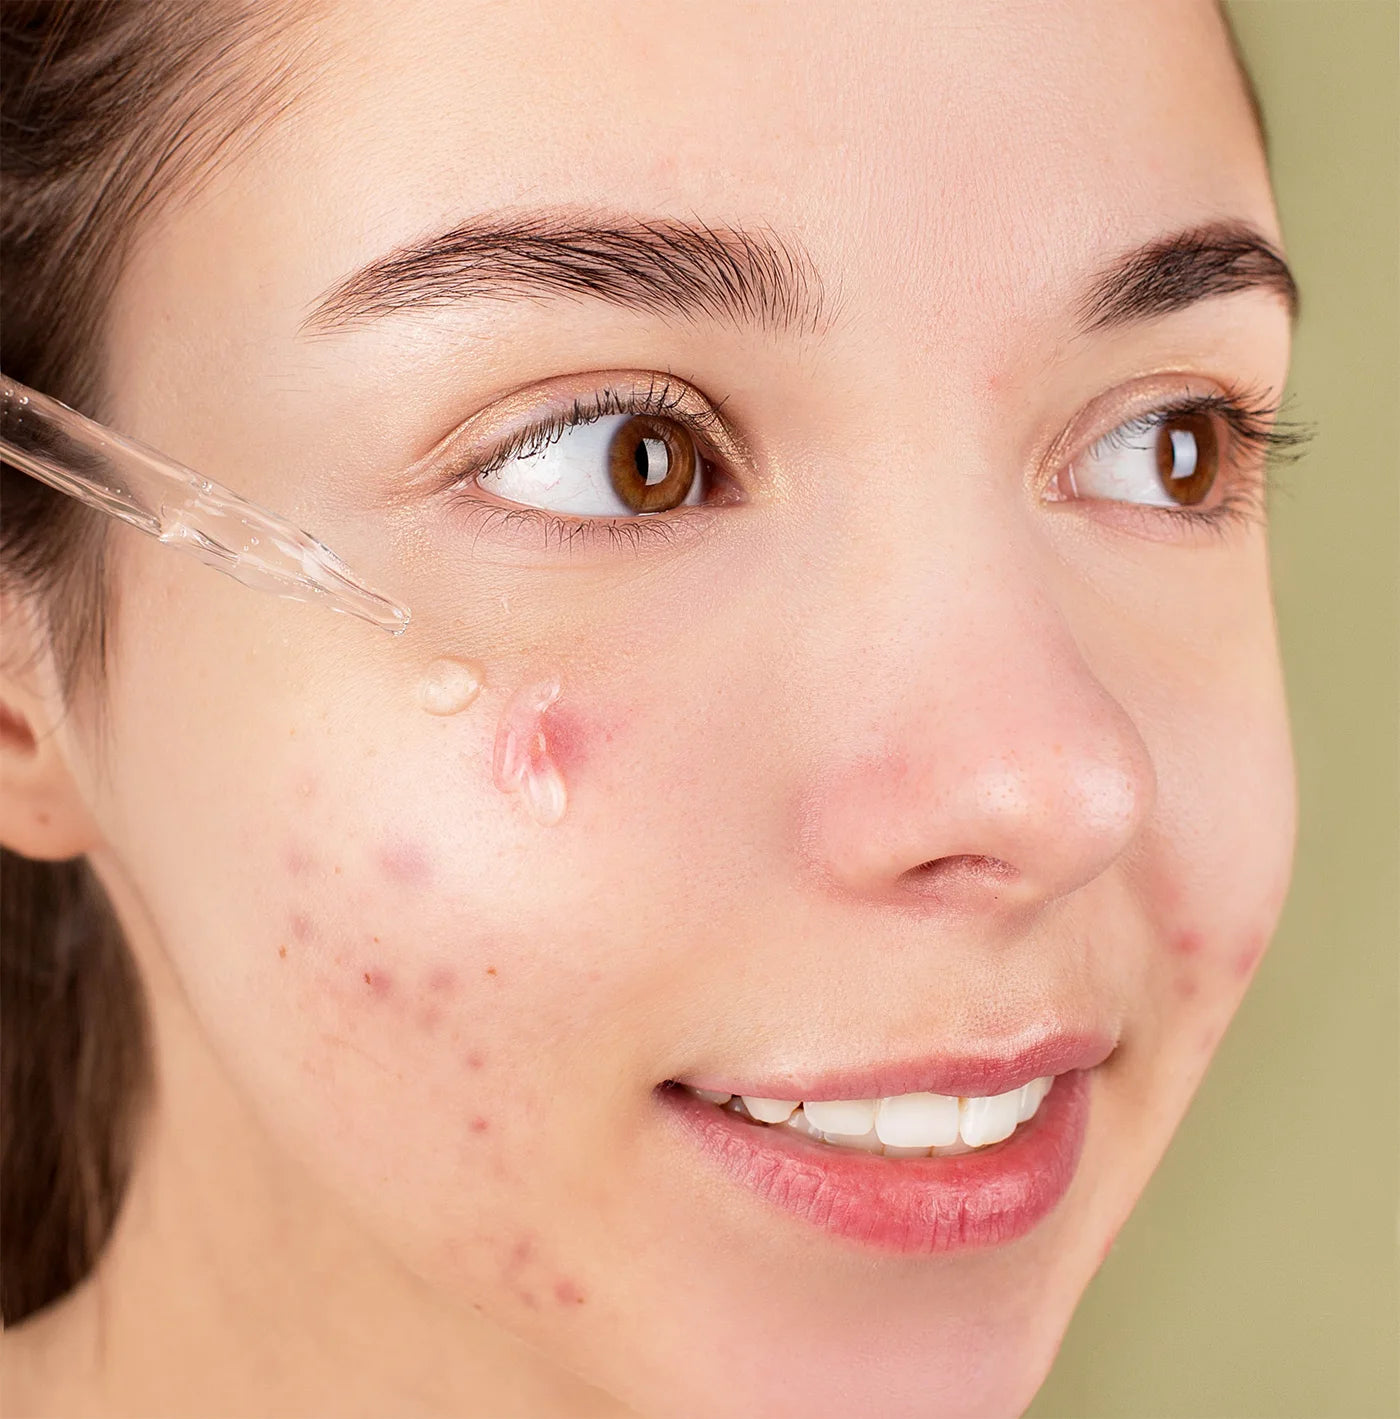 The 3 Best Skincare Ingredients To Banish Acne